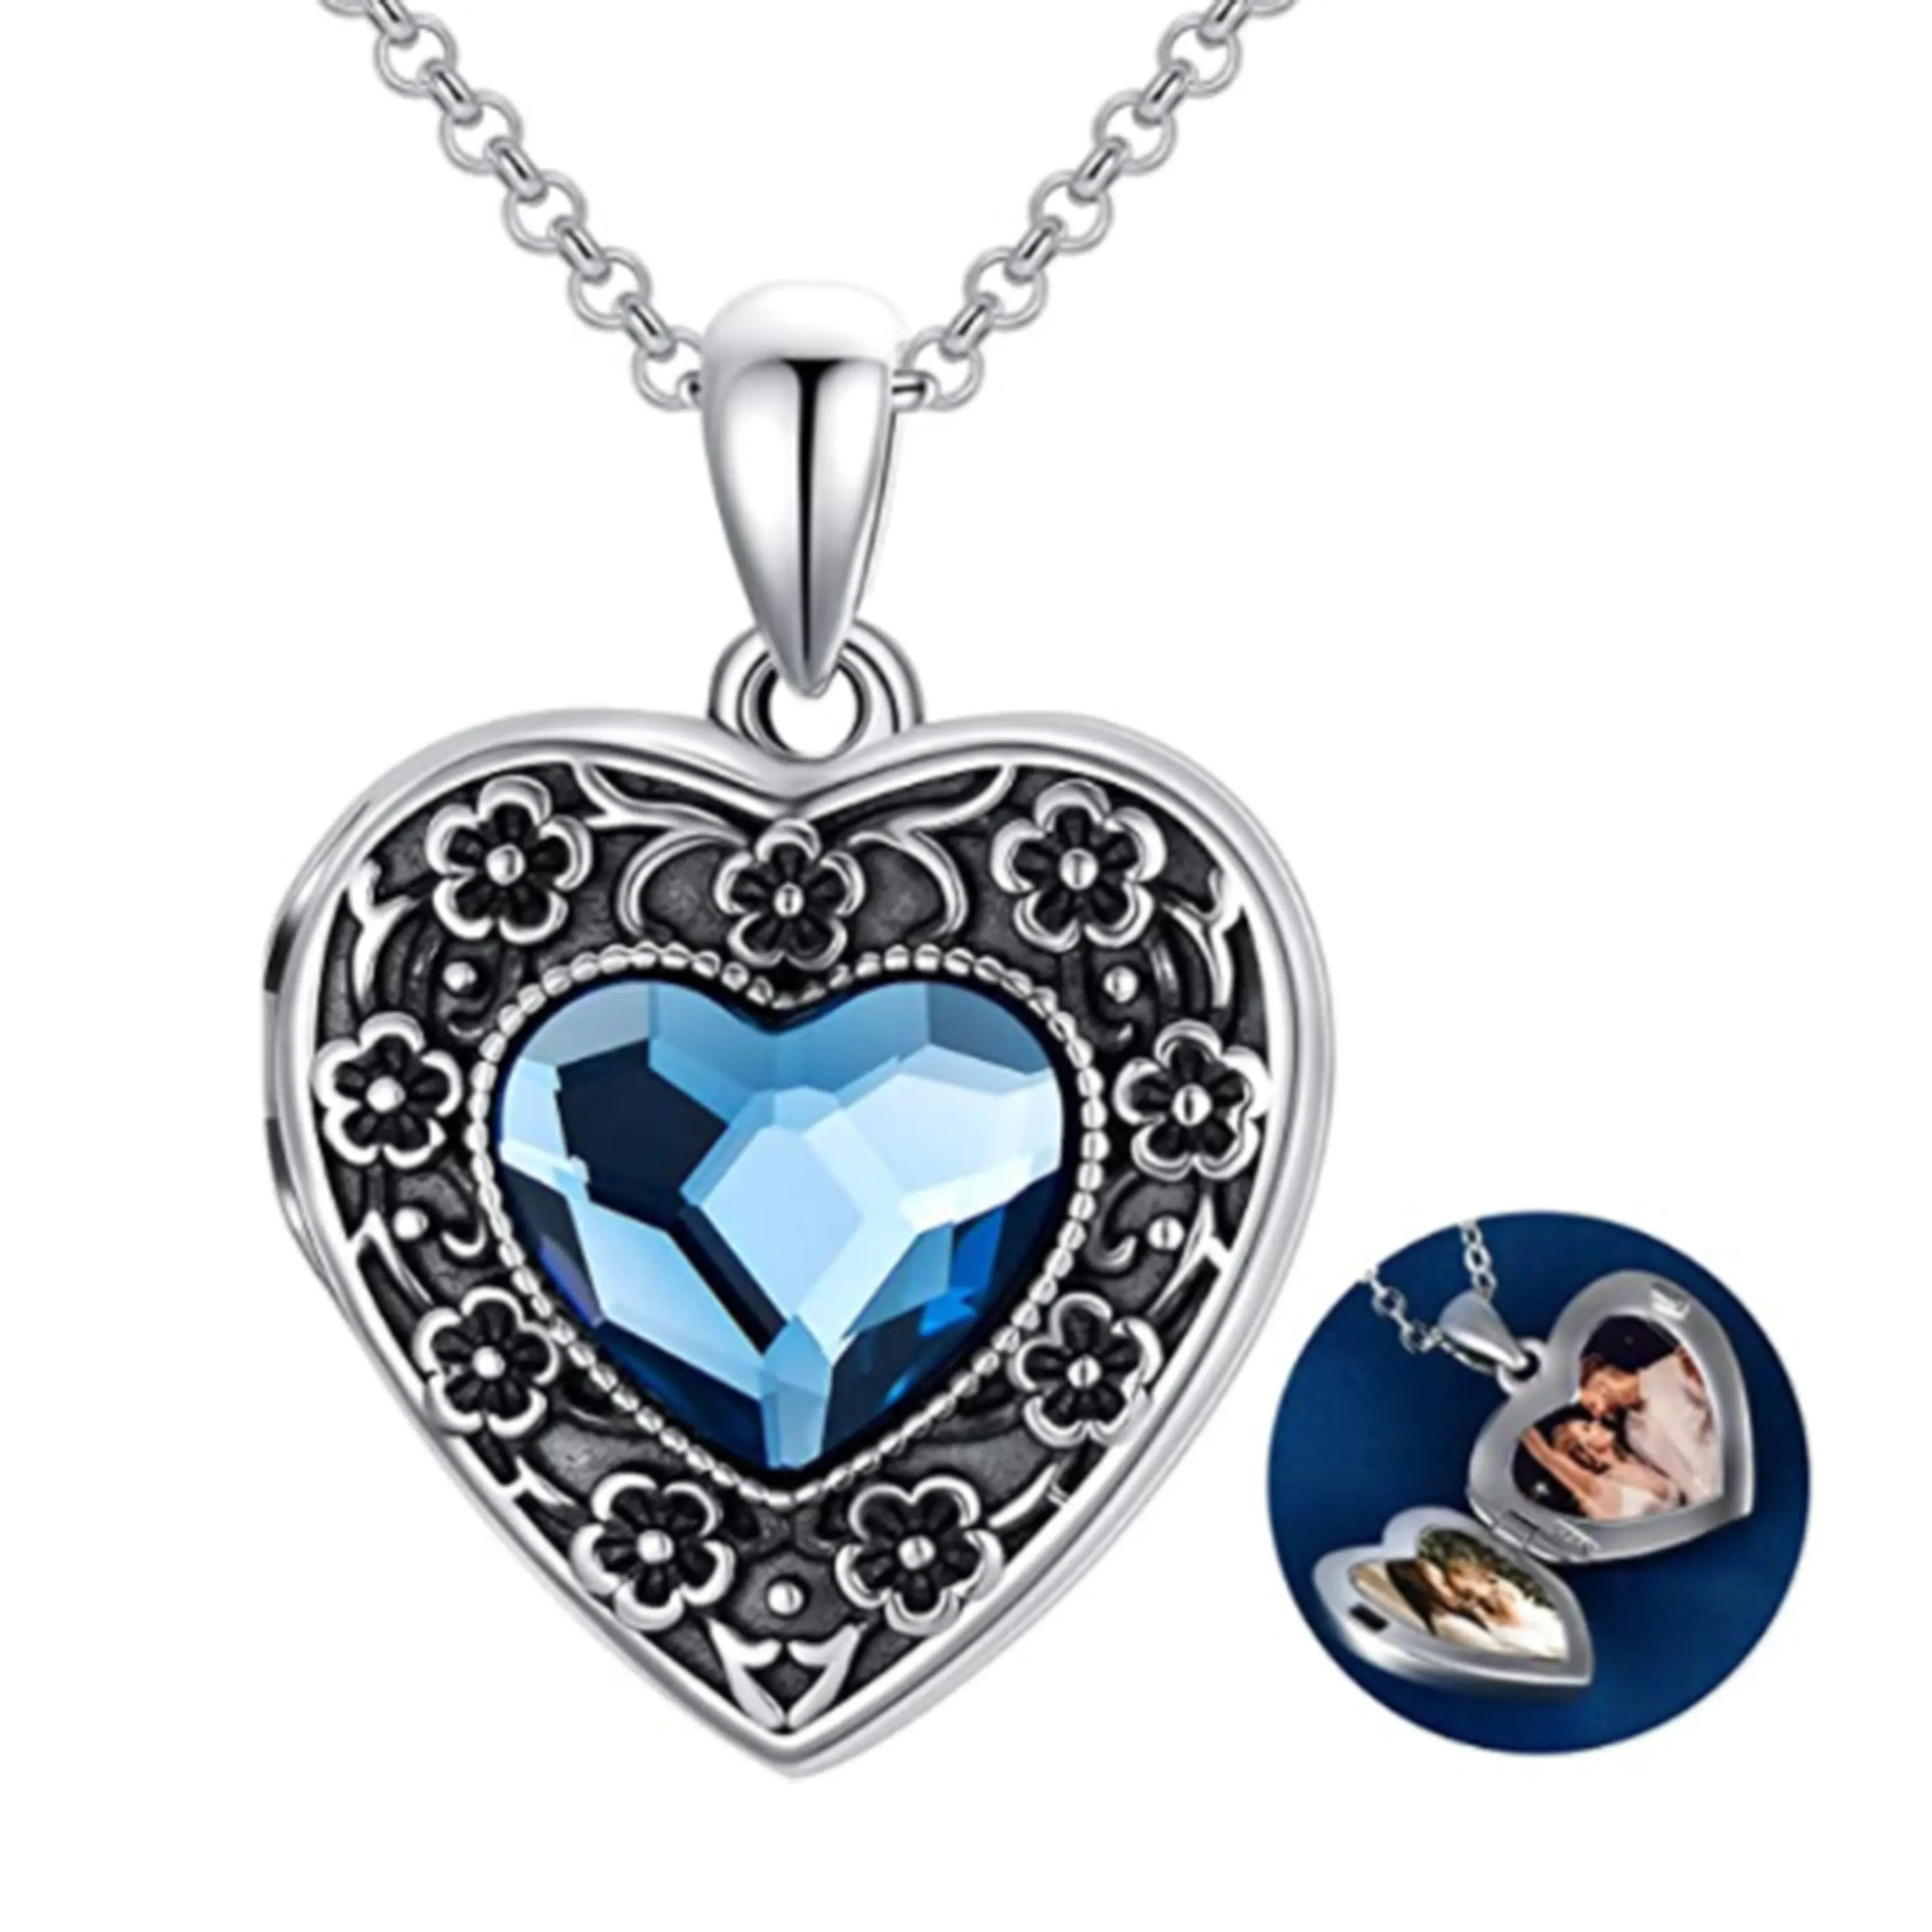 Heart Locket Necklace That Holds Pictures Sterling Silver Flower Lockets Jewelry for Women